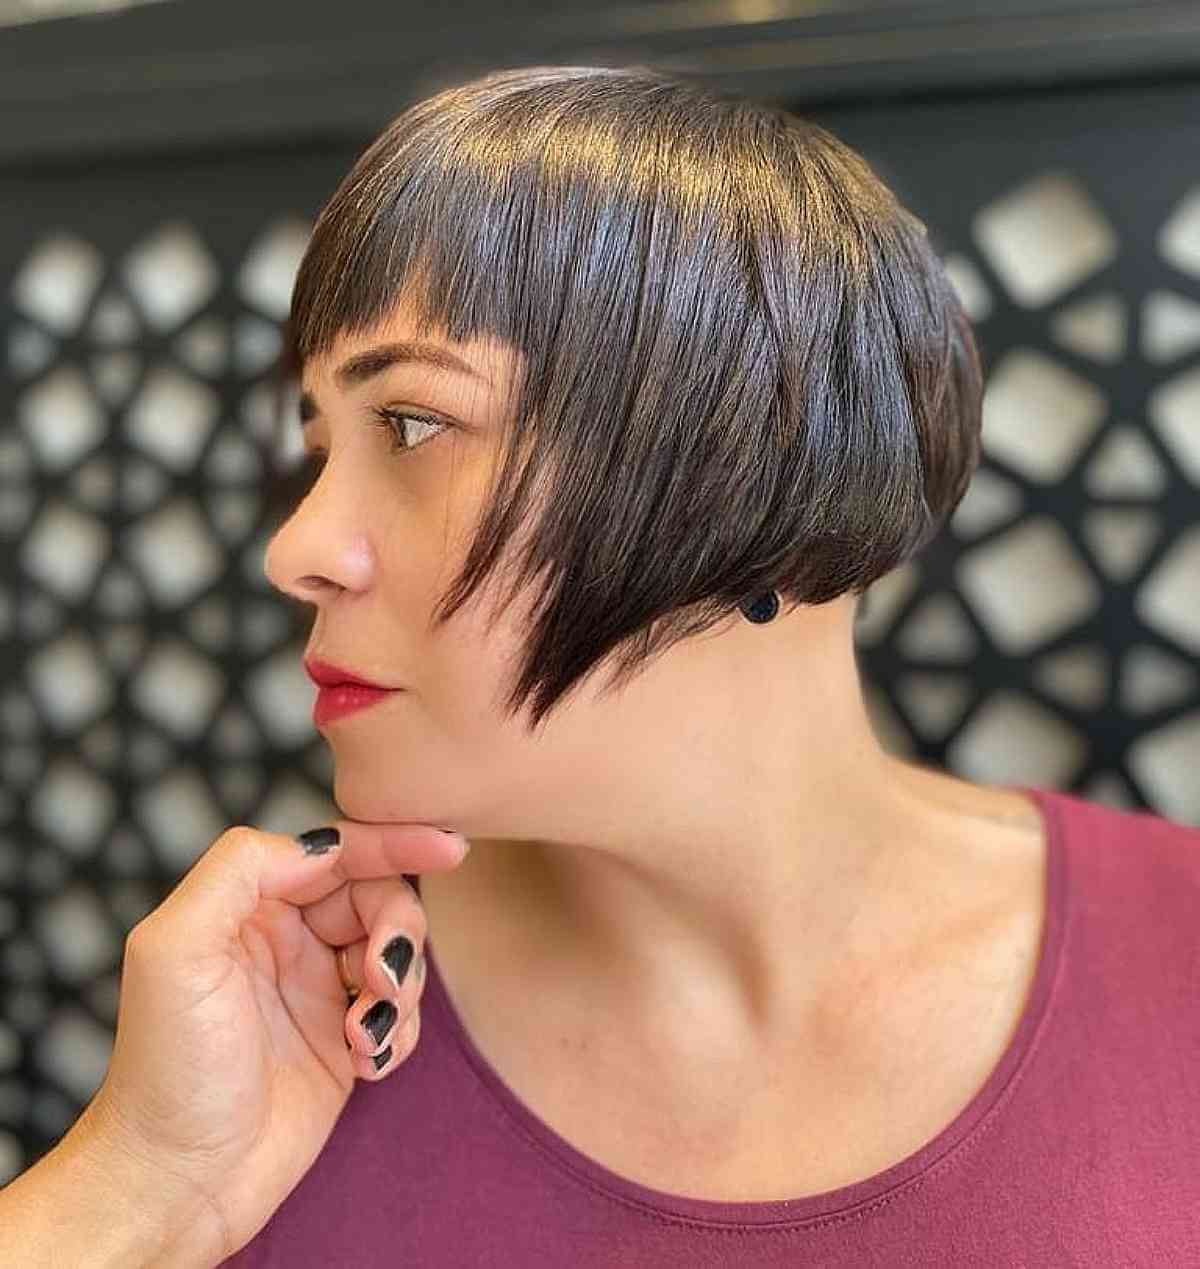 Short Stacked Bob with Bangs on Women Over 40